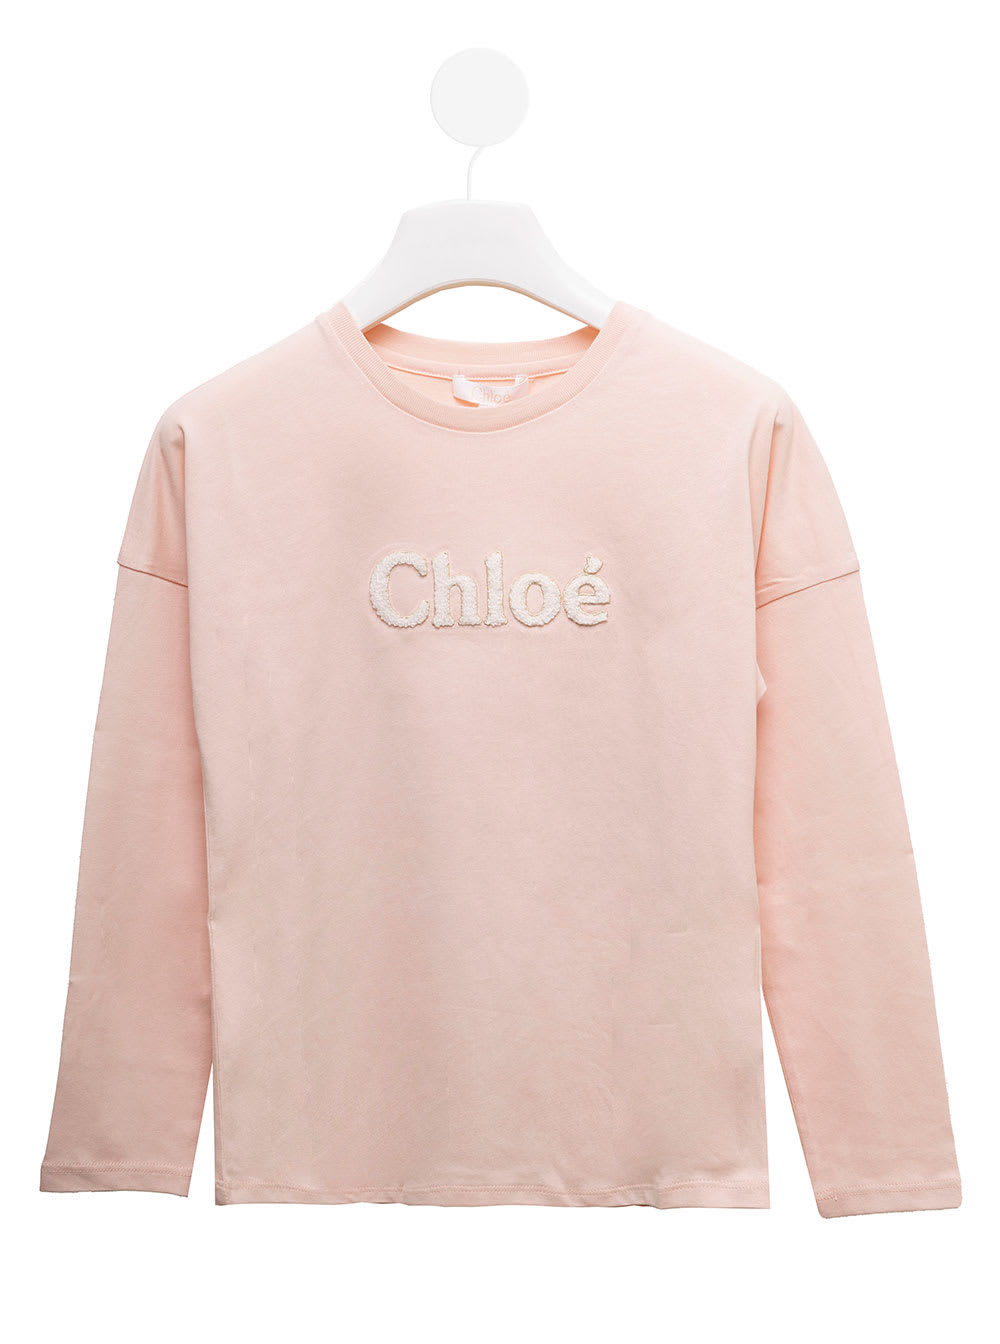 Long-sleeved Pink Cottont-shirt With Logo Chloé Kids Girl